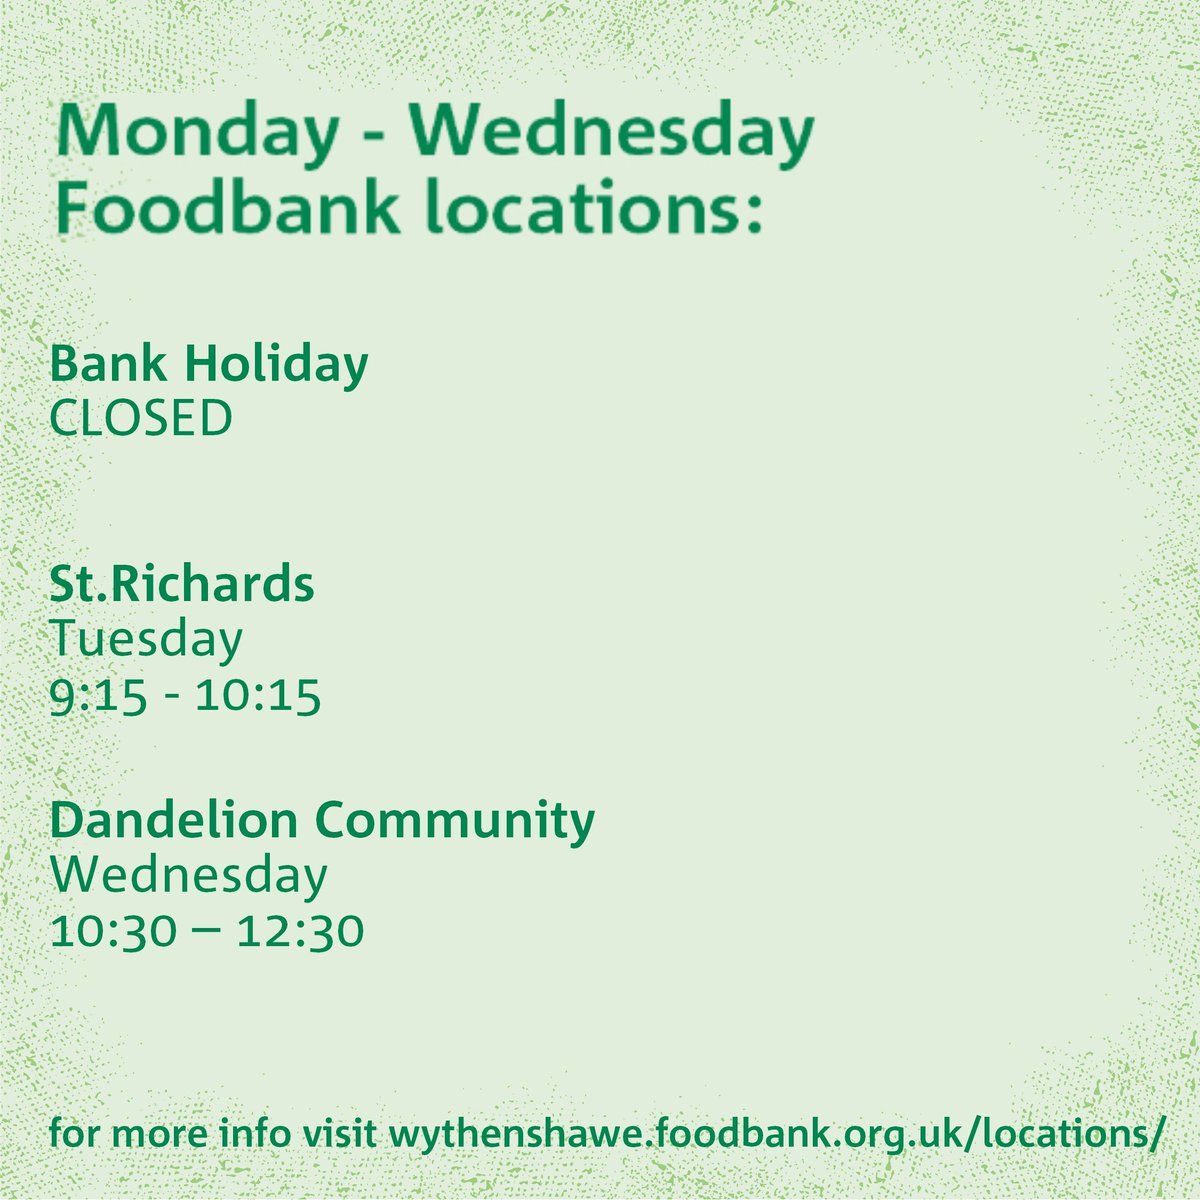 As a reminder that Dandelion is CLOSED tomorrow. All of our other foodbanks are still open as normal.